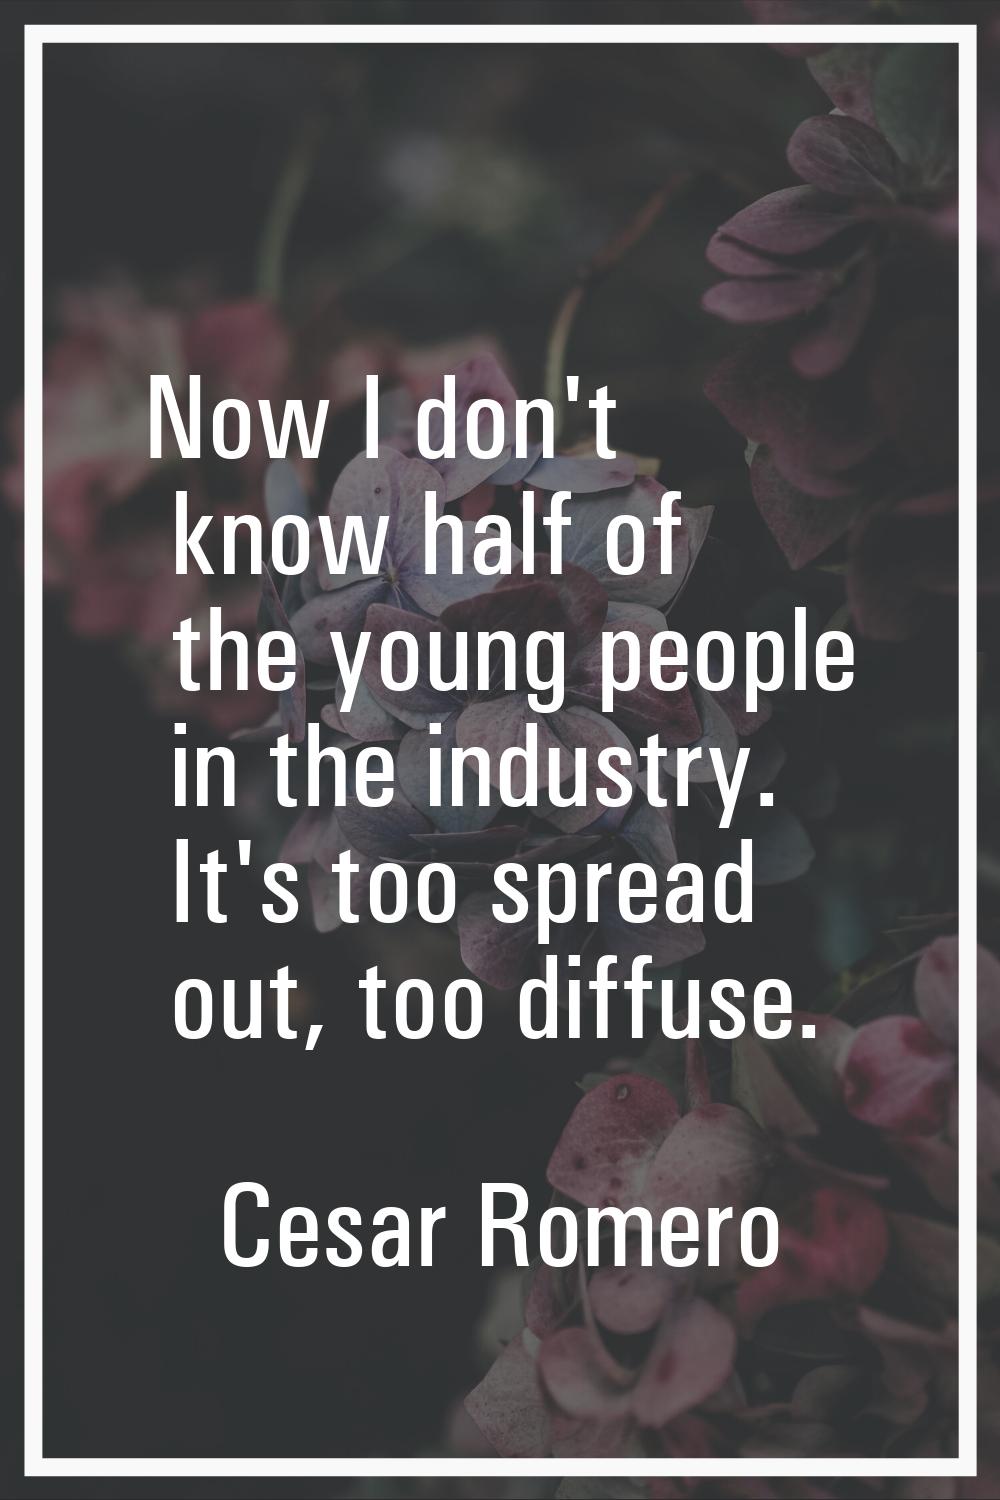 Now I don't know half of the young people in the industry. It's too spread out, too diffuse.